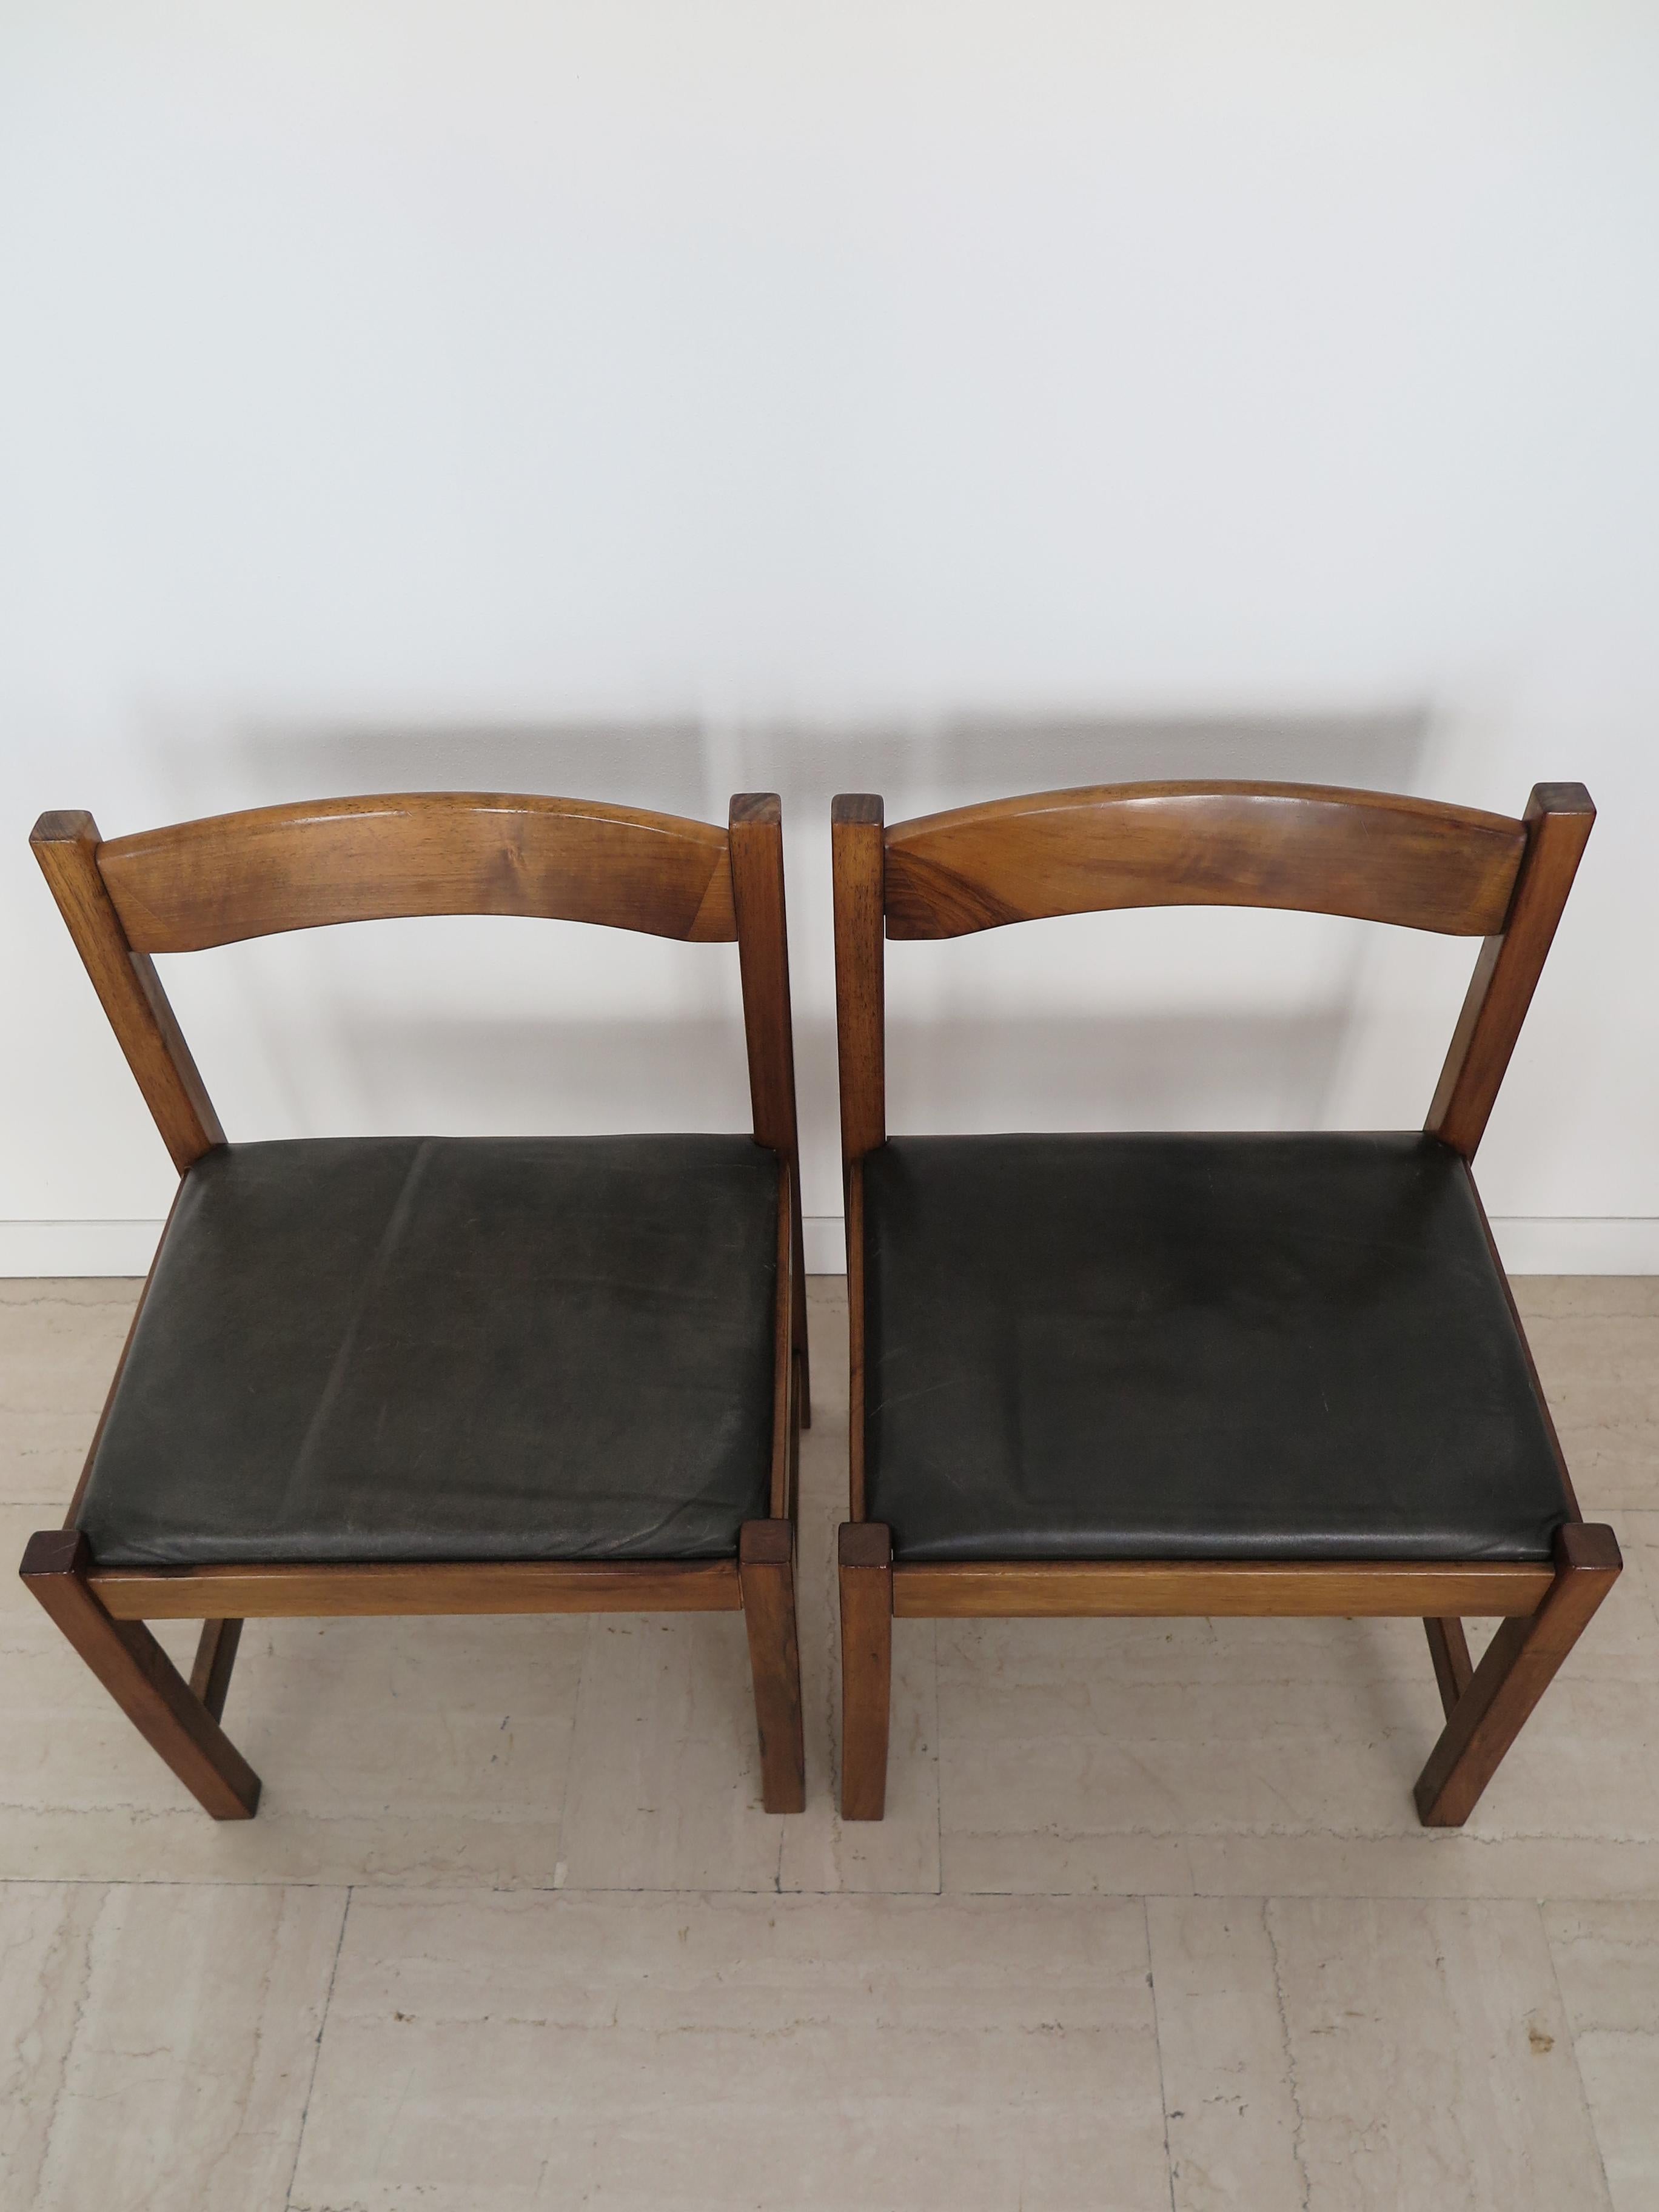 G. Michelucci for Poltronova Italian Midcentury Wood Leather Dining Chairs 1960s For Sale 3